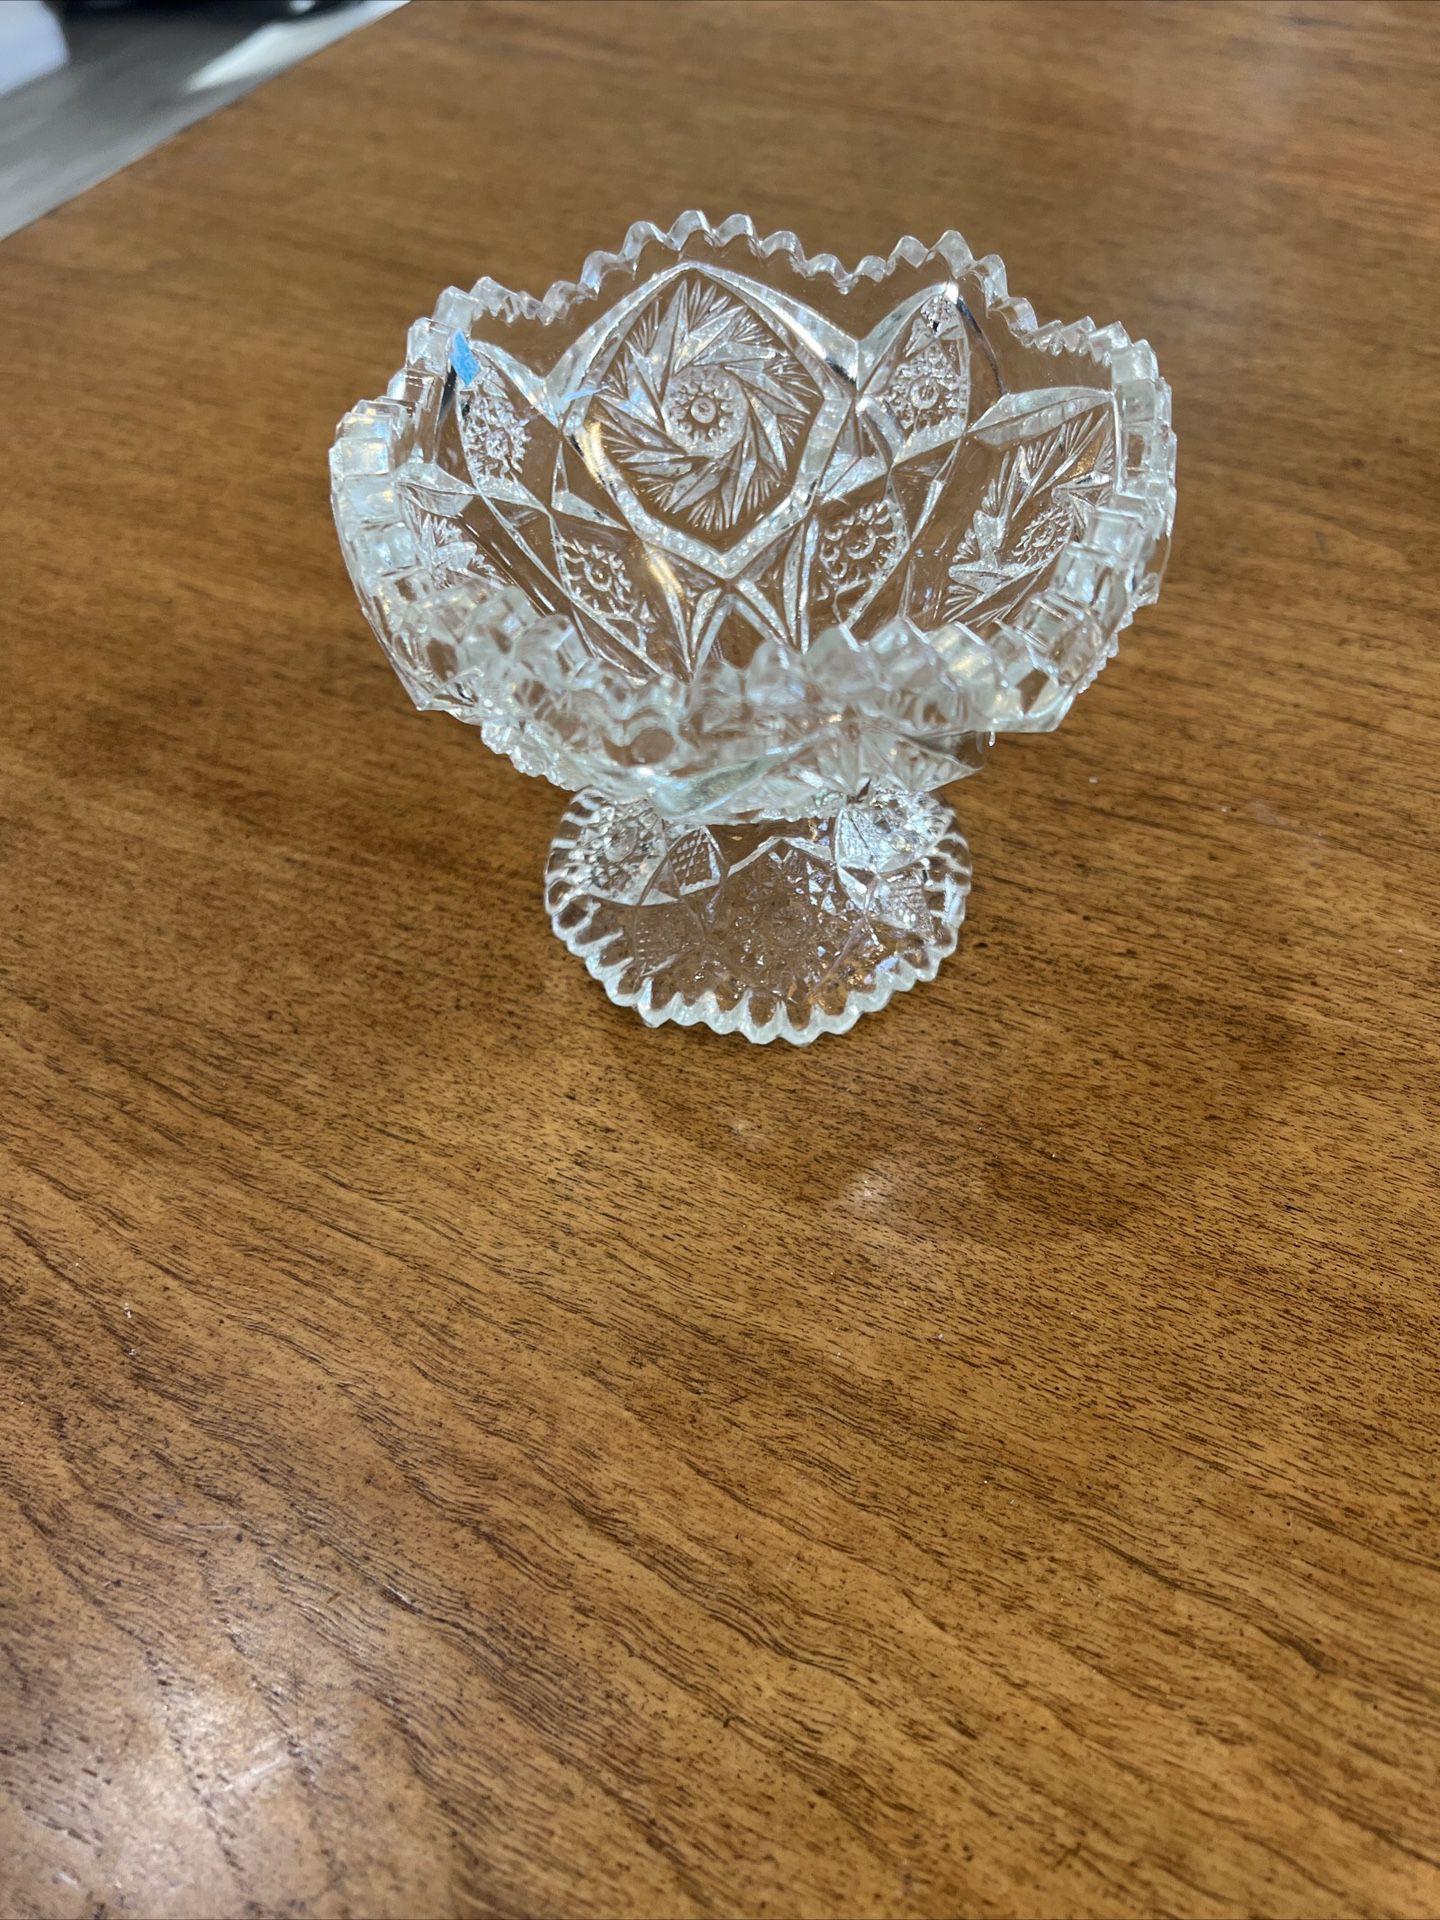 Crystal Candy Dish’s Or Jelly Dish